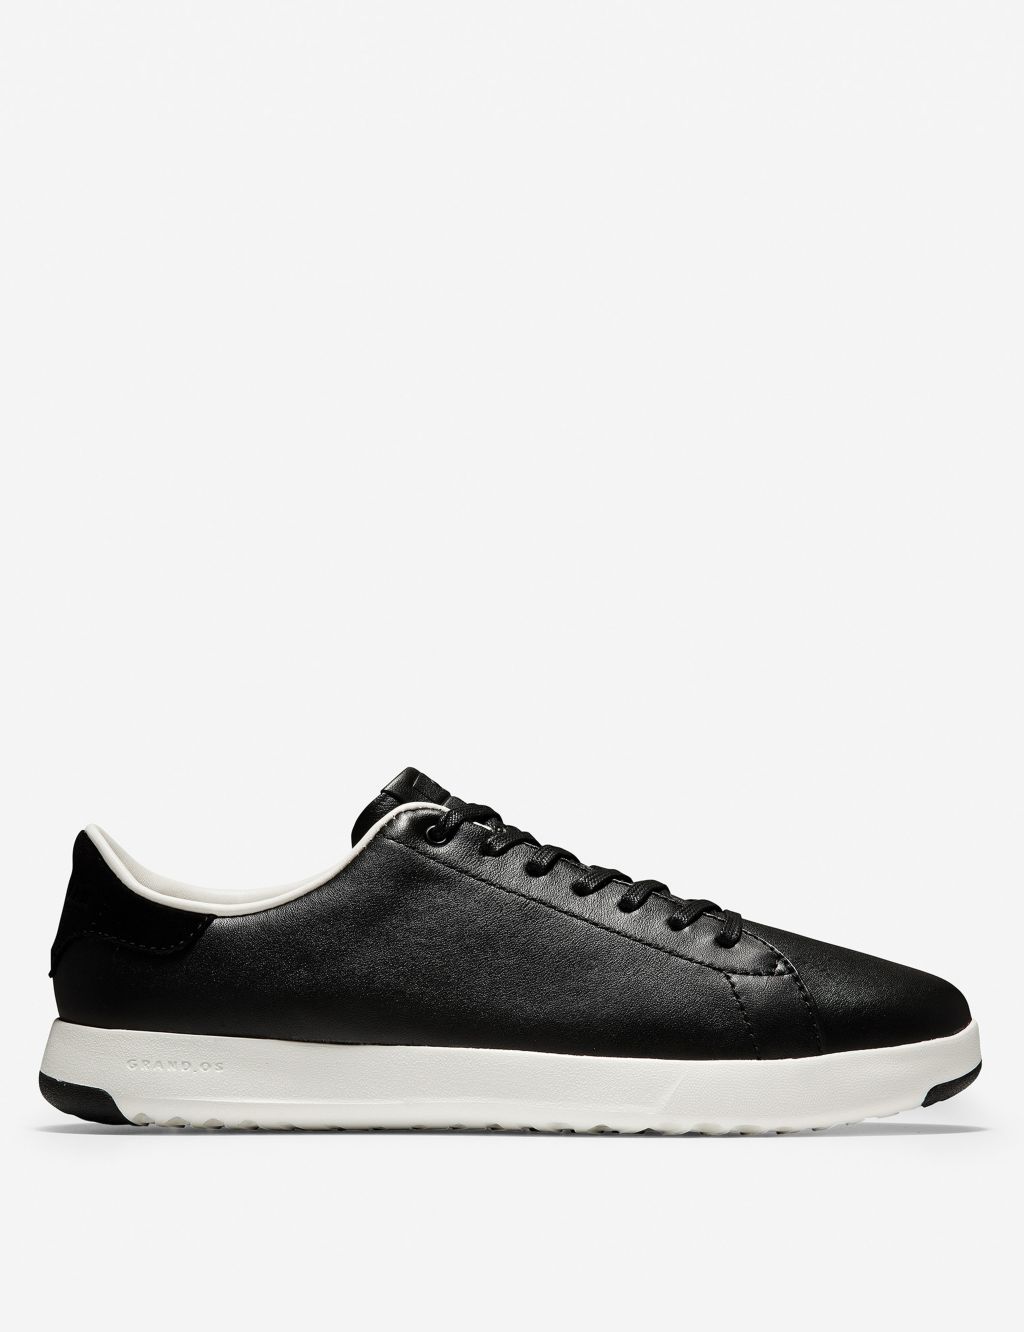 Grandpro Leather Lace Up Trainers image 1